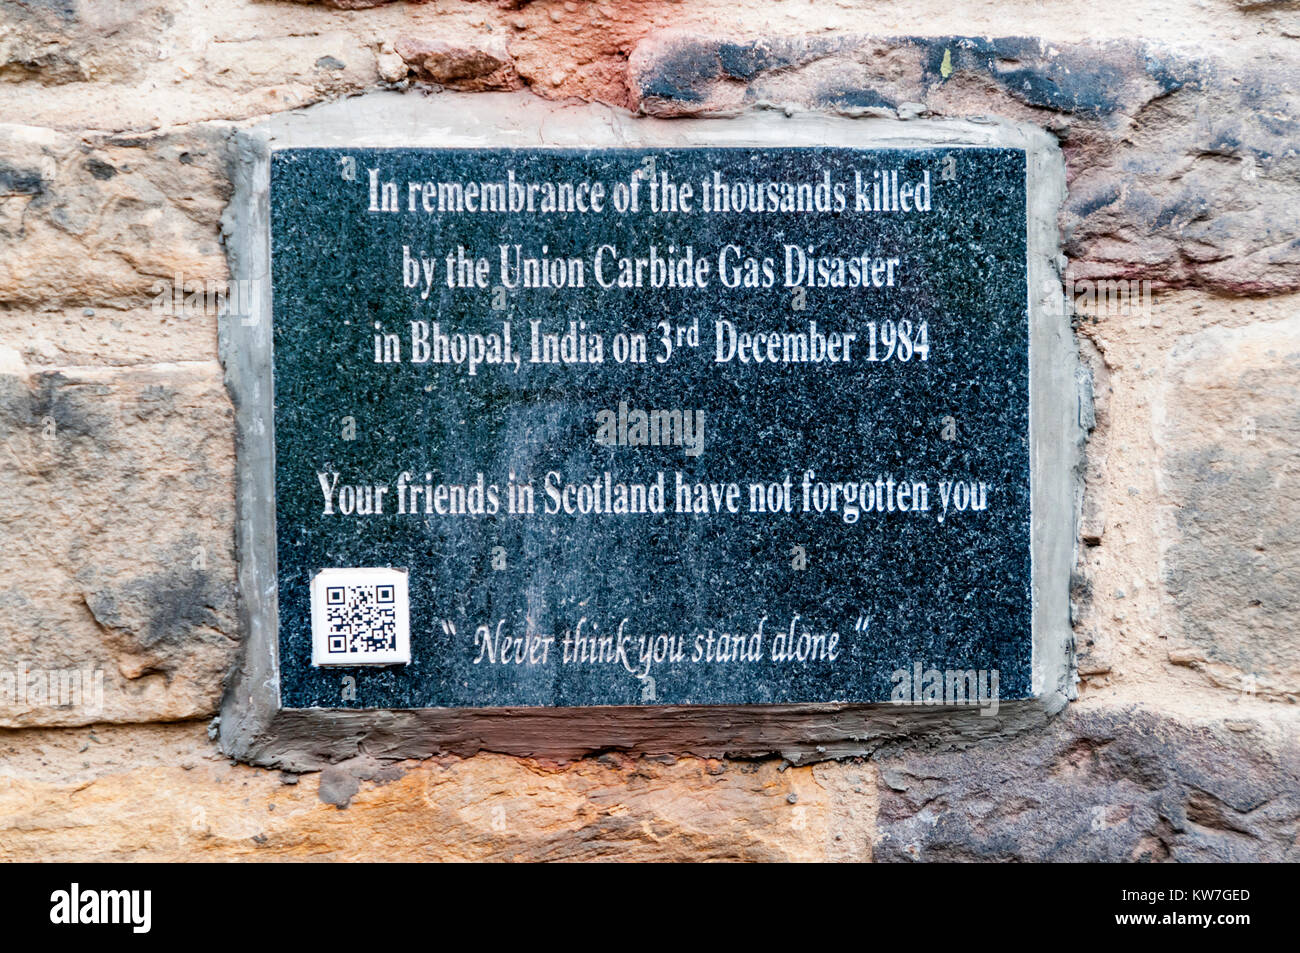 Edinburgh memorial to people killed in Union Carbide Gas Disaster at Bhopal, India. Stock Photo